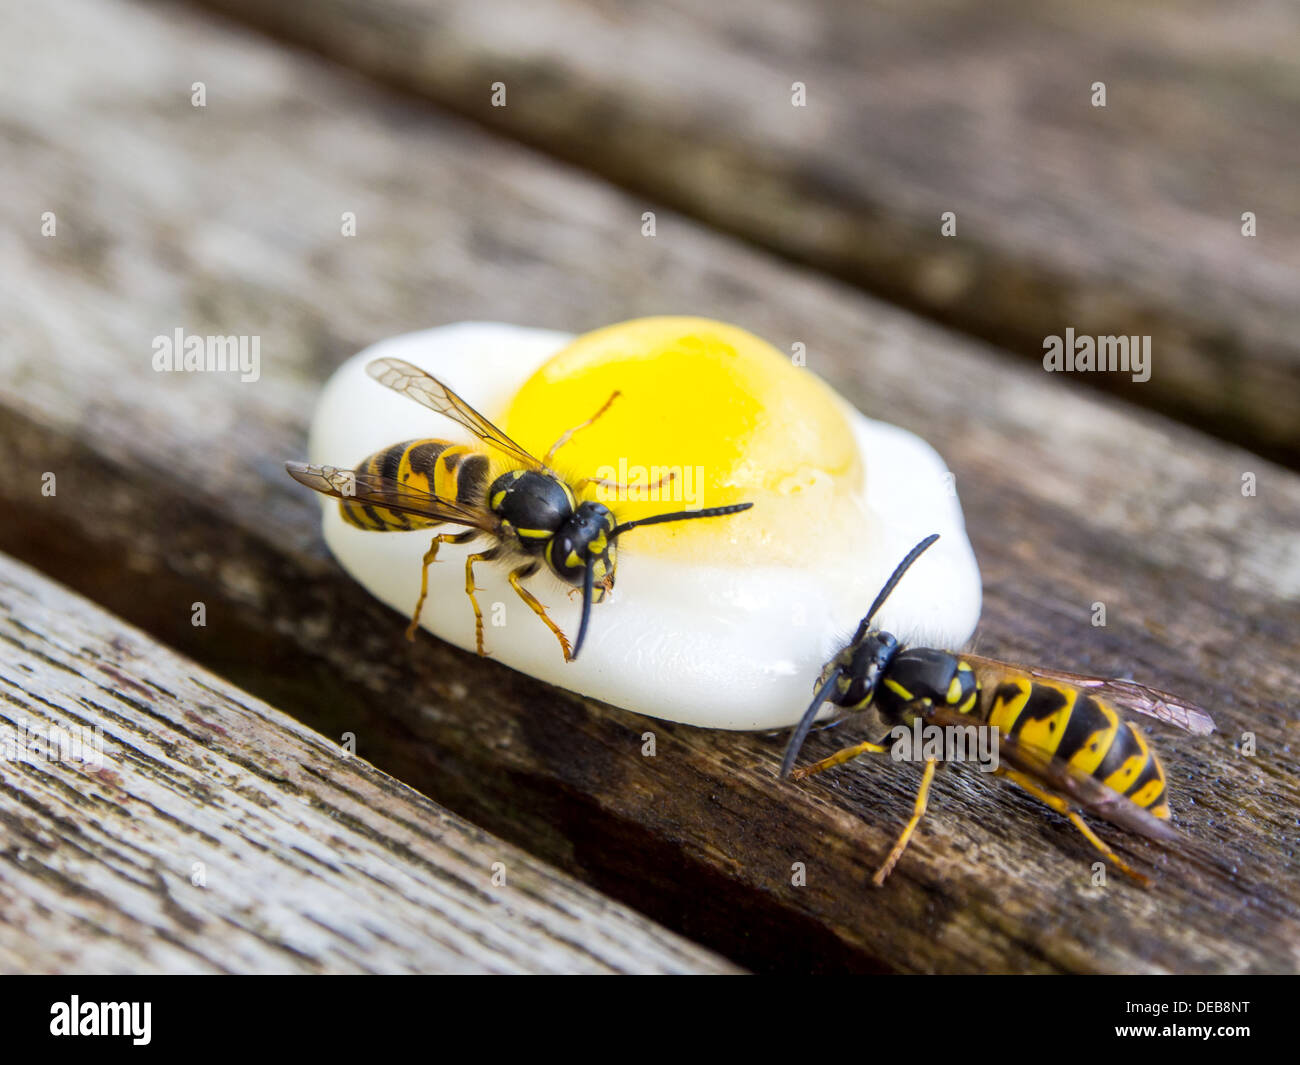 two-wasps-feeding-on-an-egg-shaped-sweet